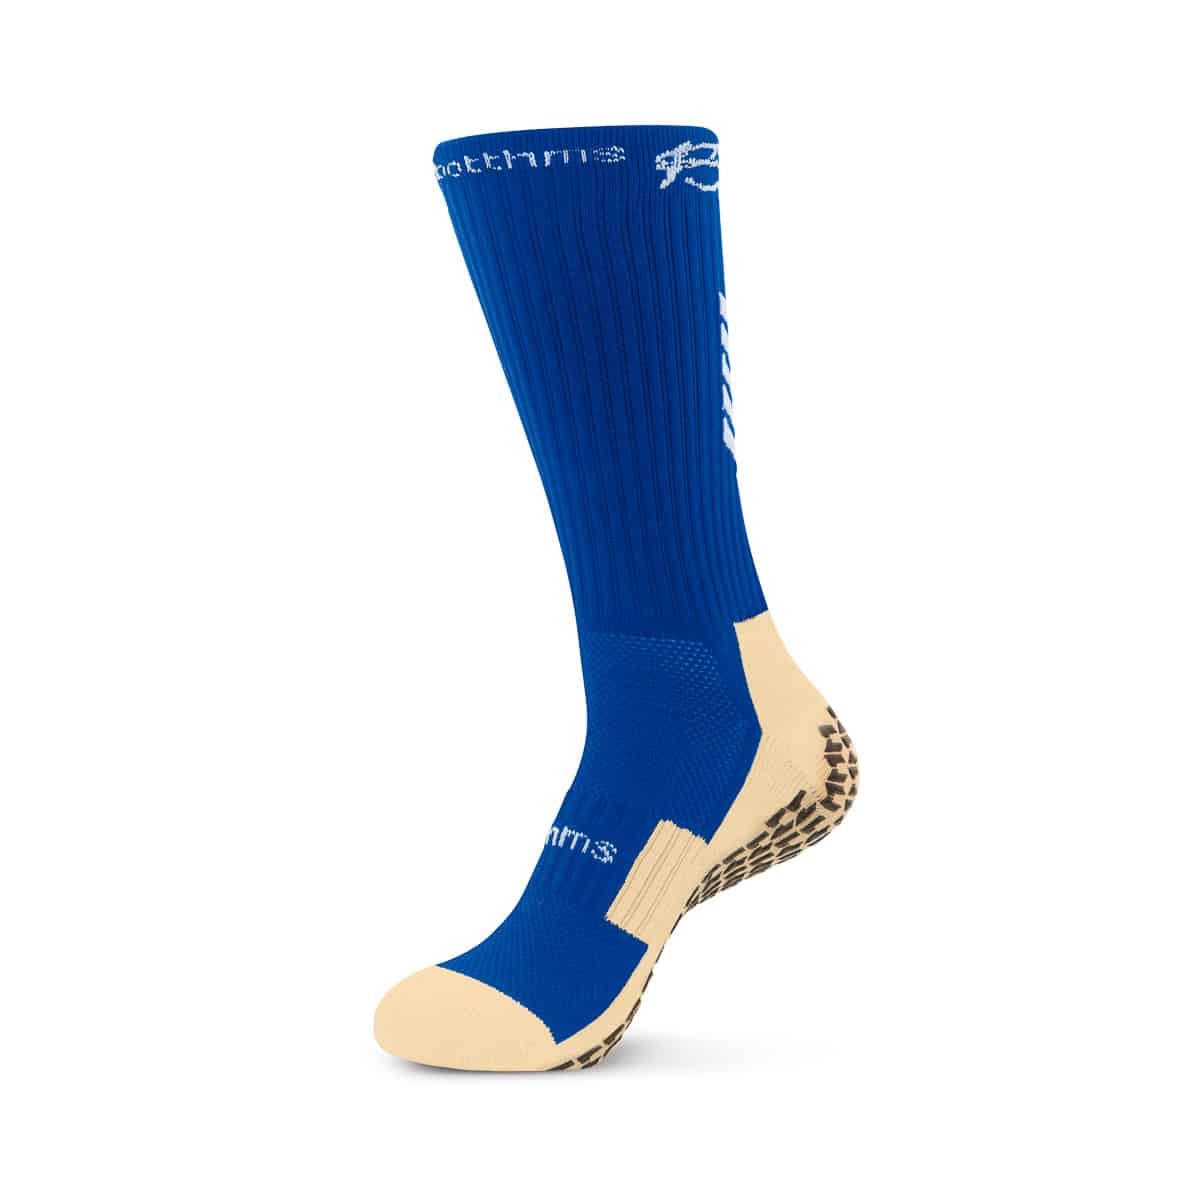 Blue Grip Socks For Athletes - Shop Our Collection - Botthms